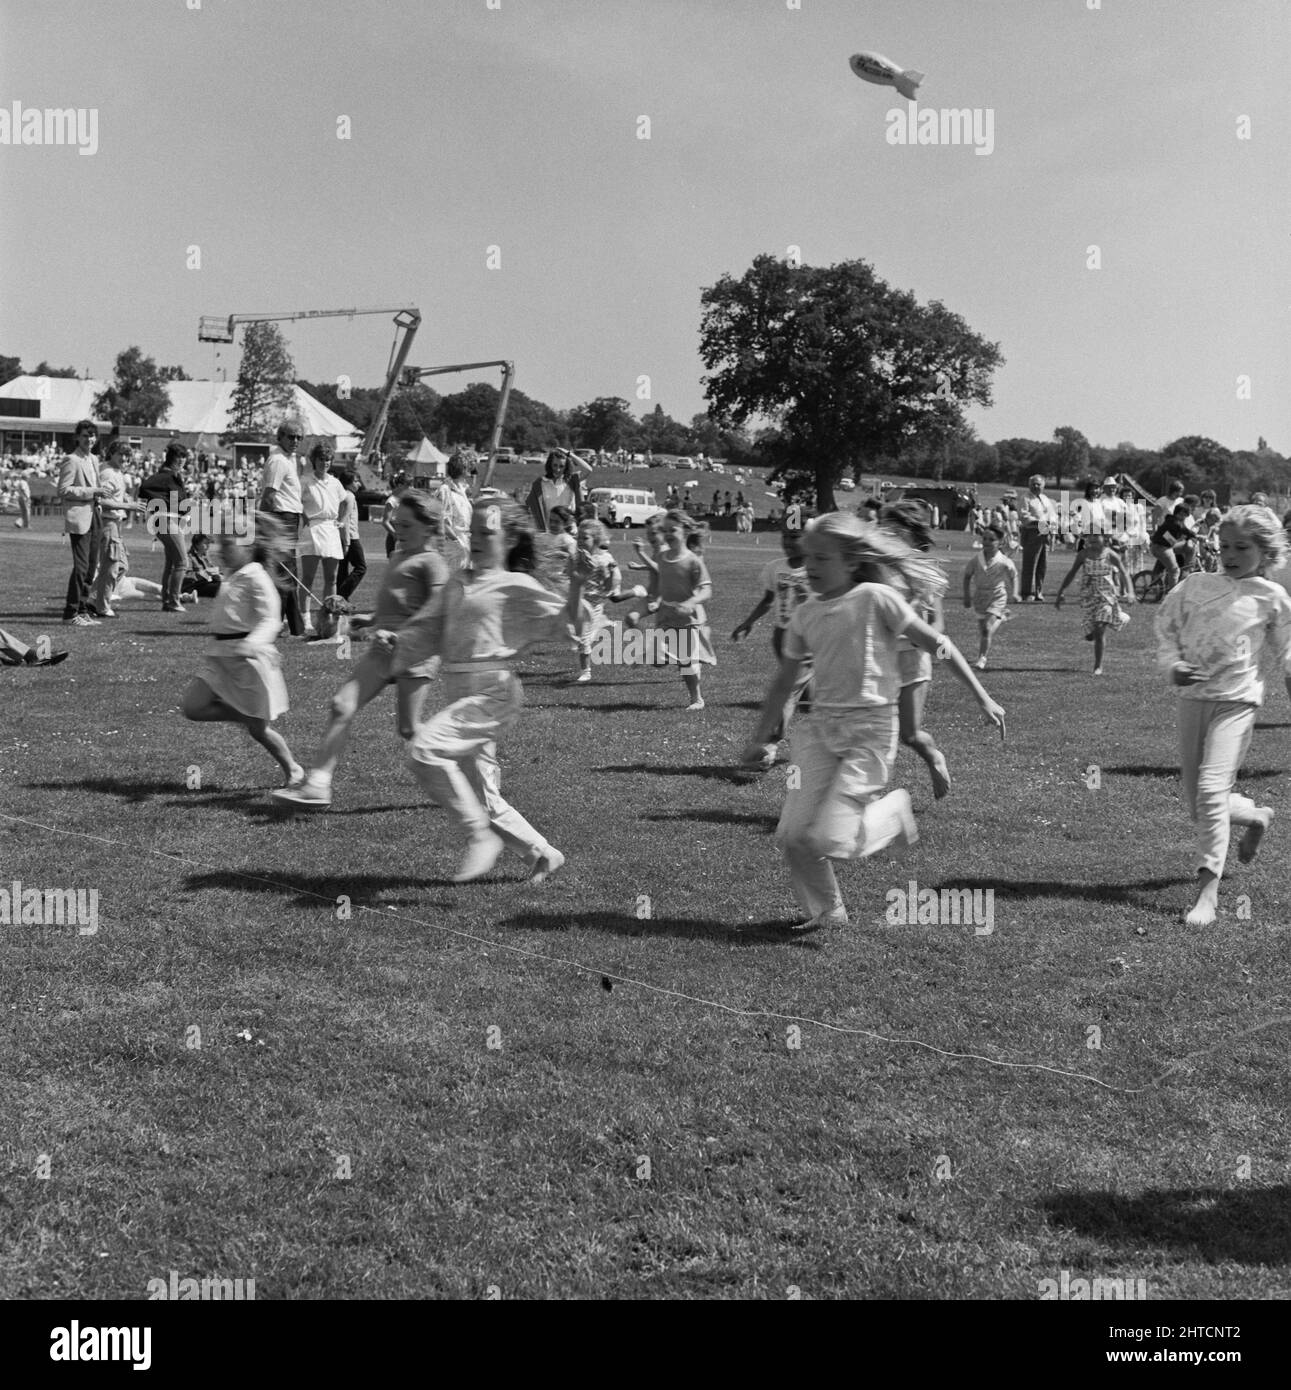 Laing Sports Ground, Rowley Lane, Elstree, Barnet, London, 21/06/1986. Children reaching the finishing line of one of the children's races at the 1986 Family Day at Laing's Sports Ground. Over 2500 people attended the Family Day and raised over &#xa3;700 for that year's designated charity The British Heart Foundation.  Attractions included; guest appearances by the cast of the television programme Grange Hill, a bouncy castle, donkey rides, Punch and Judy shows, Pierre the Clown, children's races, blindfold stunt driving and golf and six-a-side football tournaments. Stock Photo